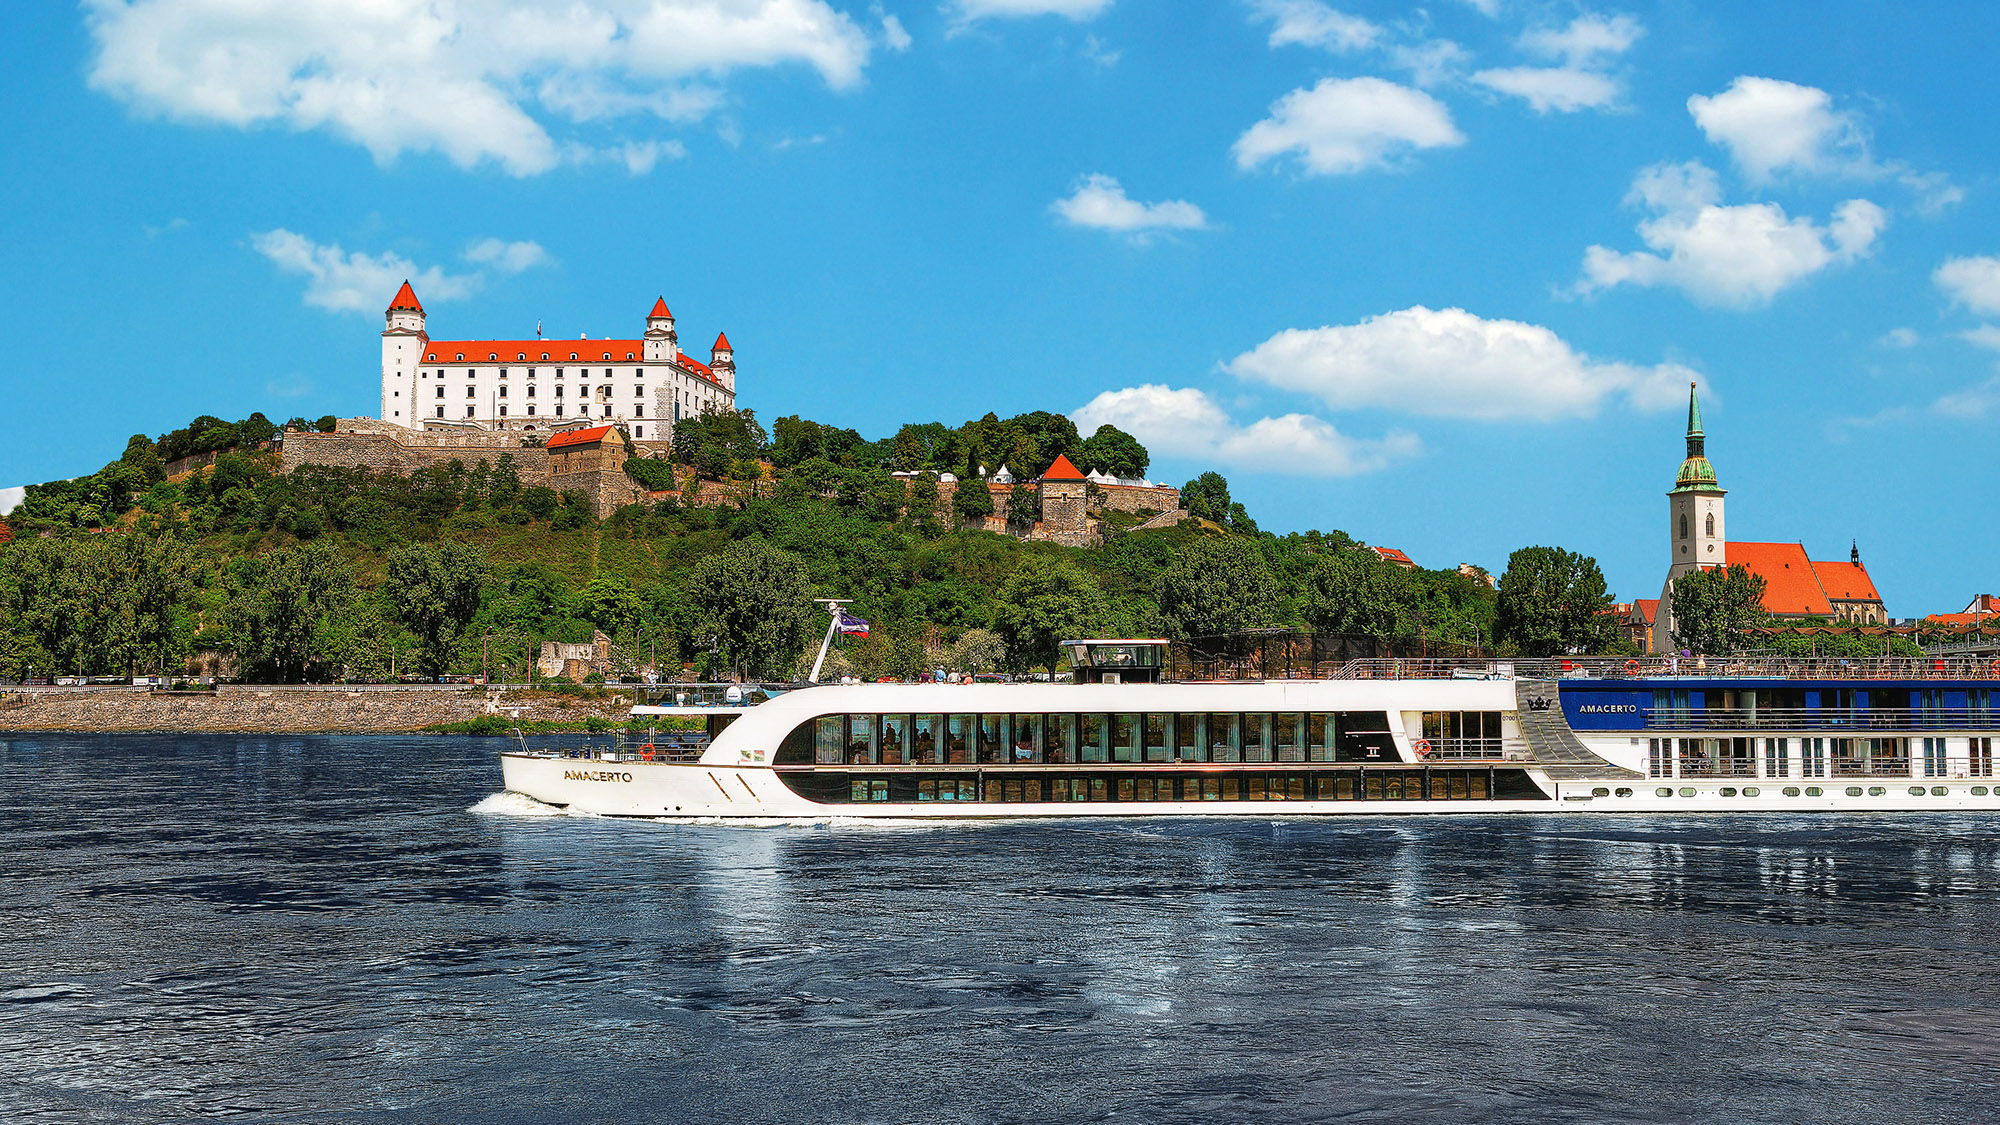 The AmaCerto is one of the ships that will sail AmaWaterways' Seven River Journey in Europe in 2023